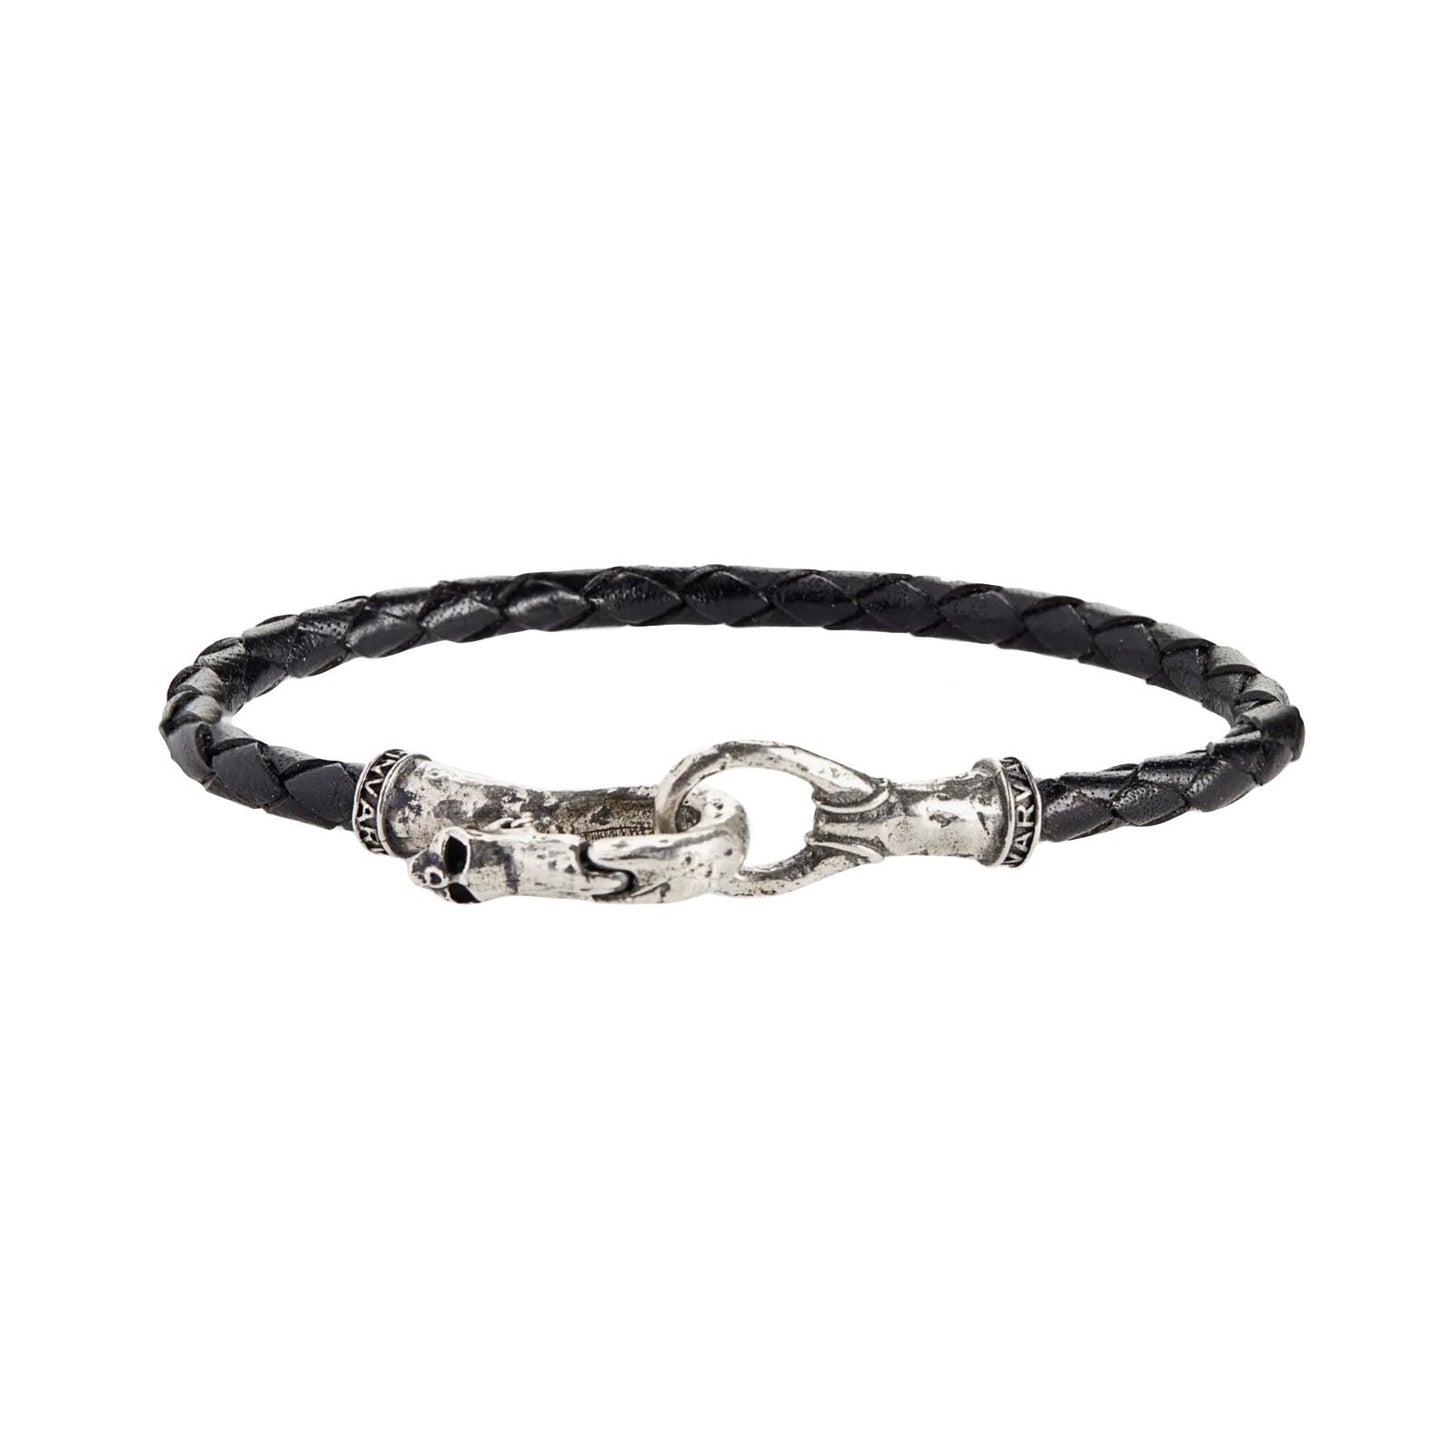 Braided Black Leather Bracelet with Skull Clasp